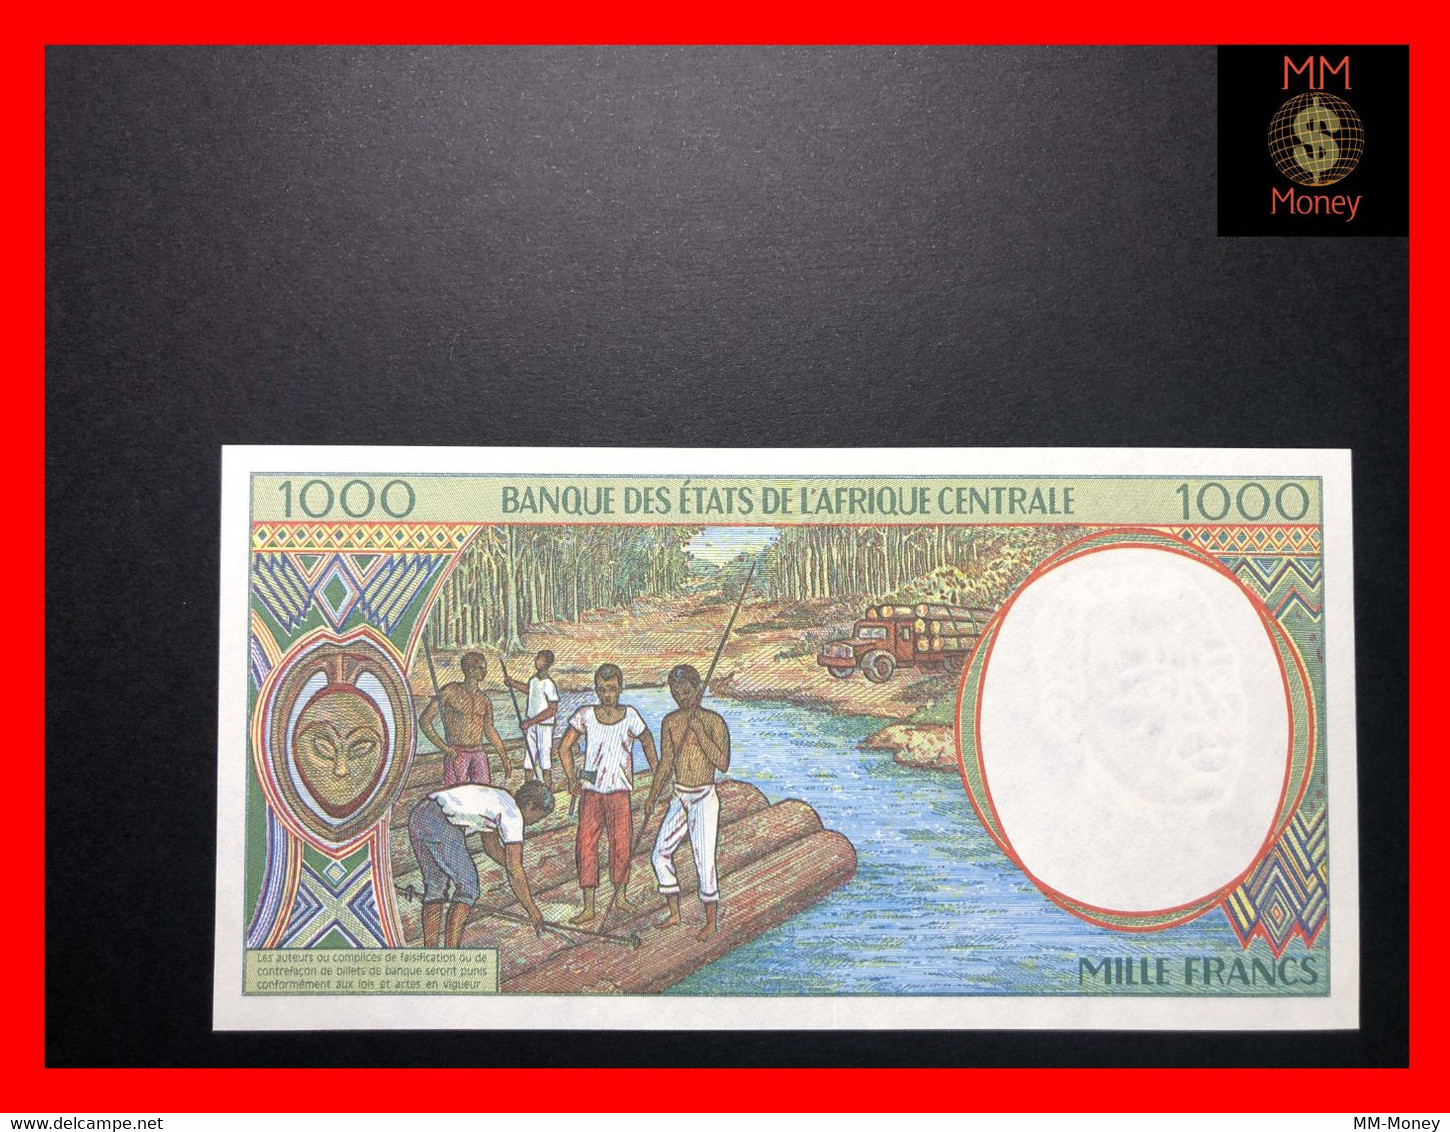 CENTRAL AFRICAN STATES  "F"  Central African Republic 1.000 1000 Francs 1994 P. 302 F  UNC - Central African States